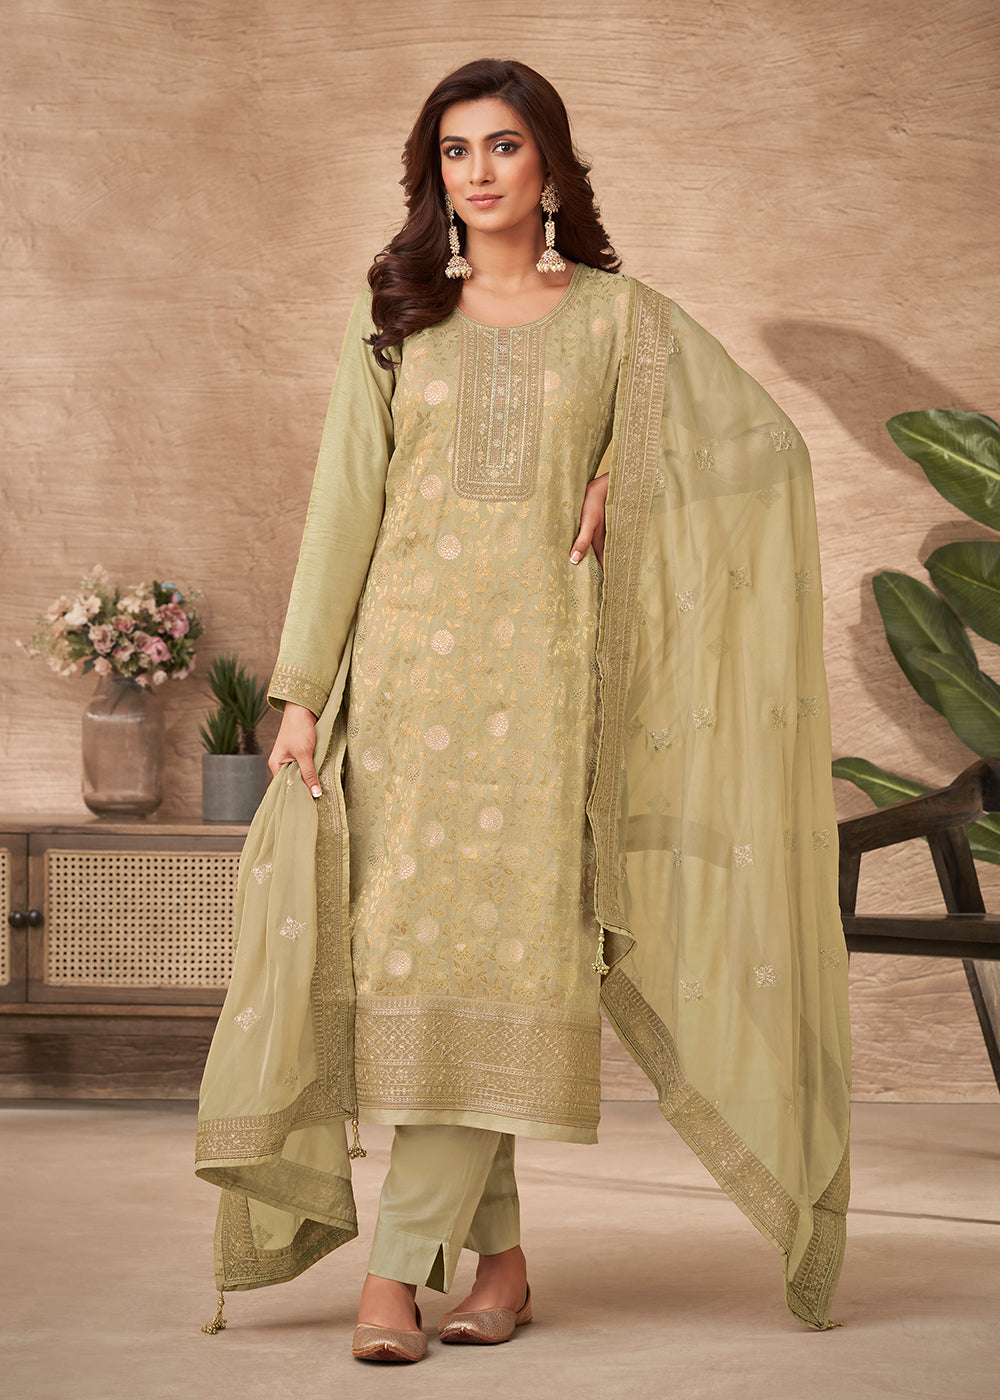 Buy Now Embroidered Green Viscose Jacquard Pant Style Salwar Suit Online in USA, UK, Canada, Germany, Australia & Worldwide at Empress Clothing. 